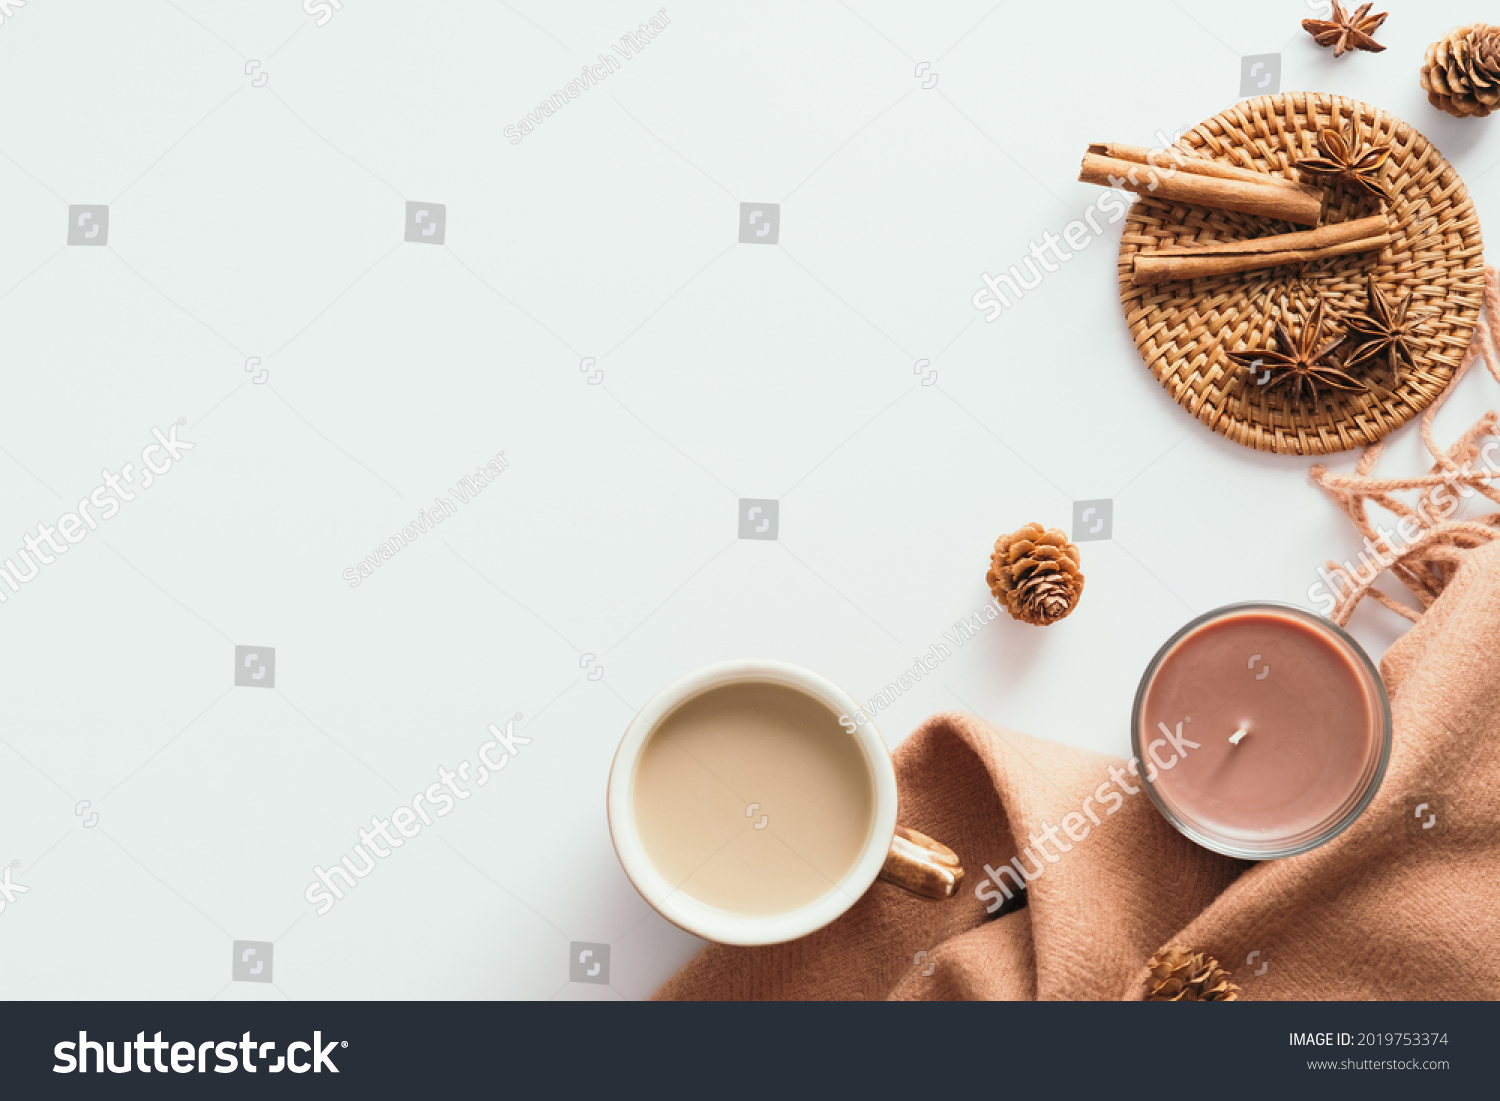 Cozy home desk table with plaid, coffee cup, candle on white background. Top view, flat lay, copy space. Autumn composition. Nordic hygge style concept. #2019753374